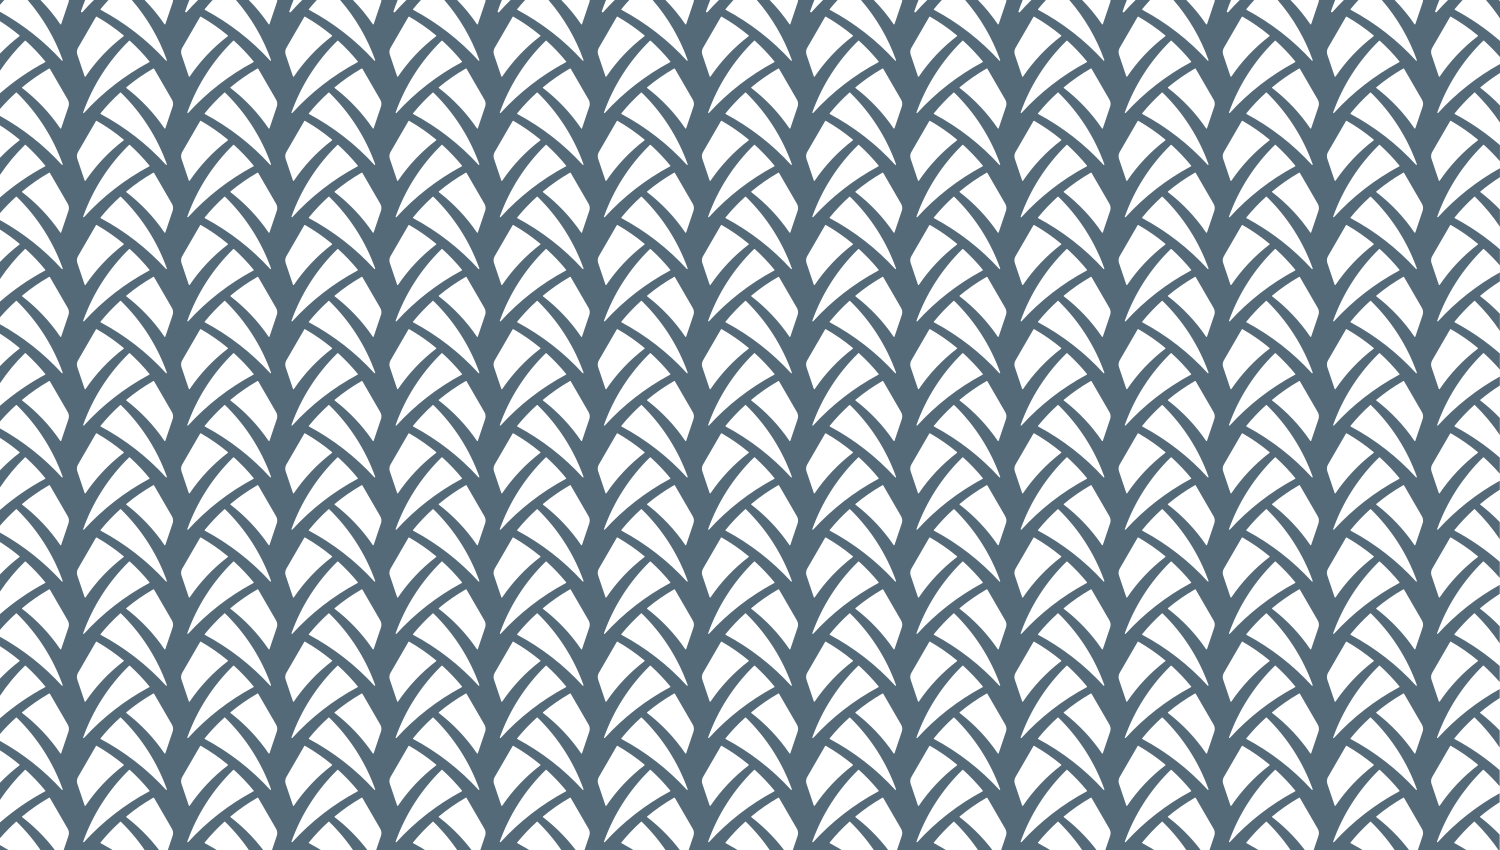 Parasoleil™ Bluestem© pattern displayed with a blue color overlay